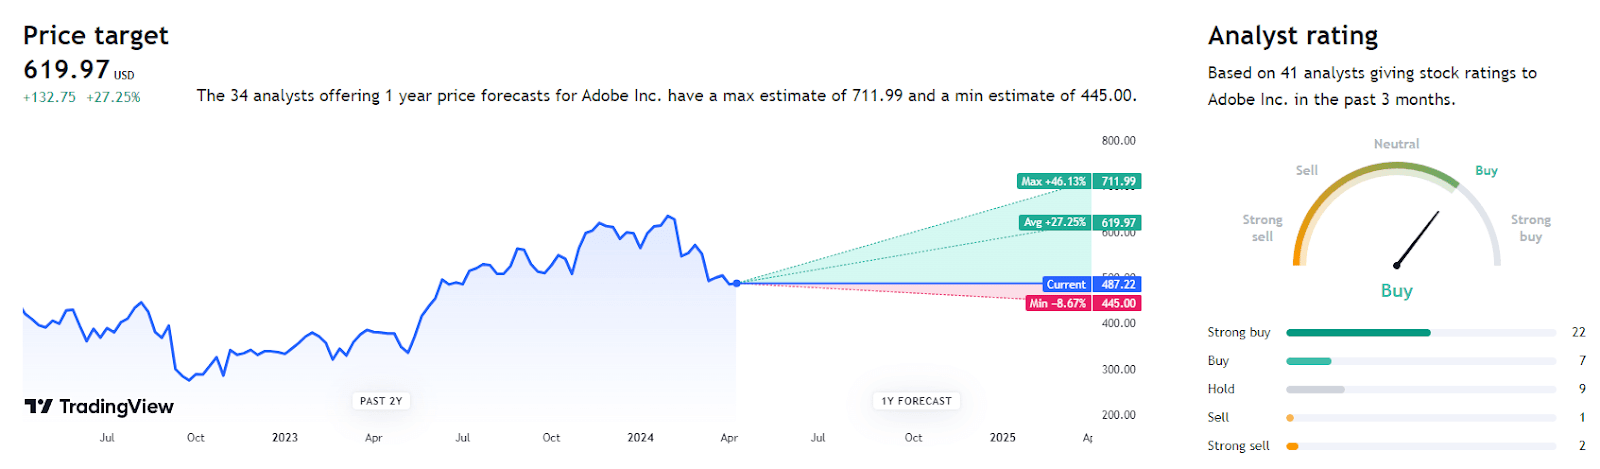 Wall Street analysts’ Adobe stock price 12-month forecast